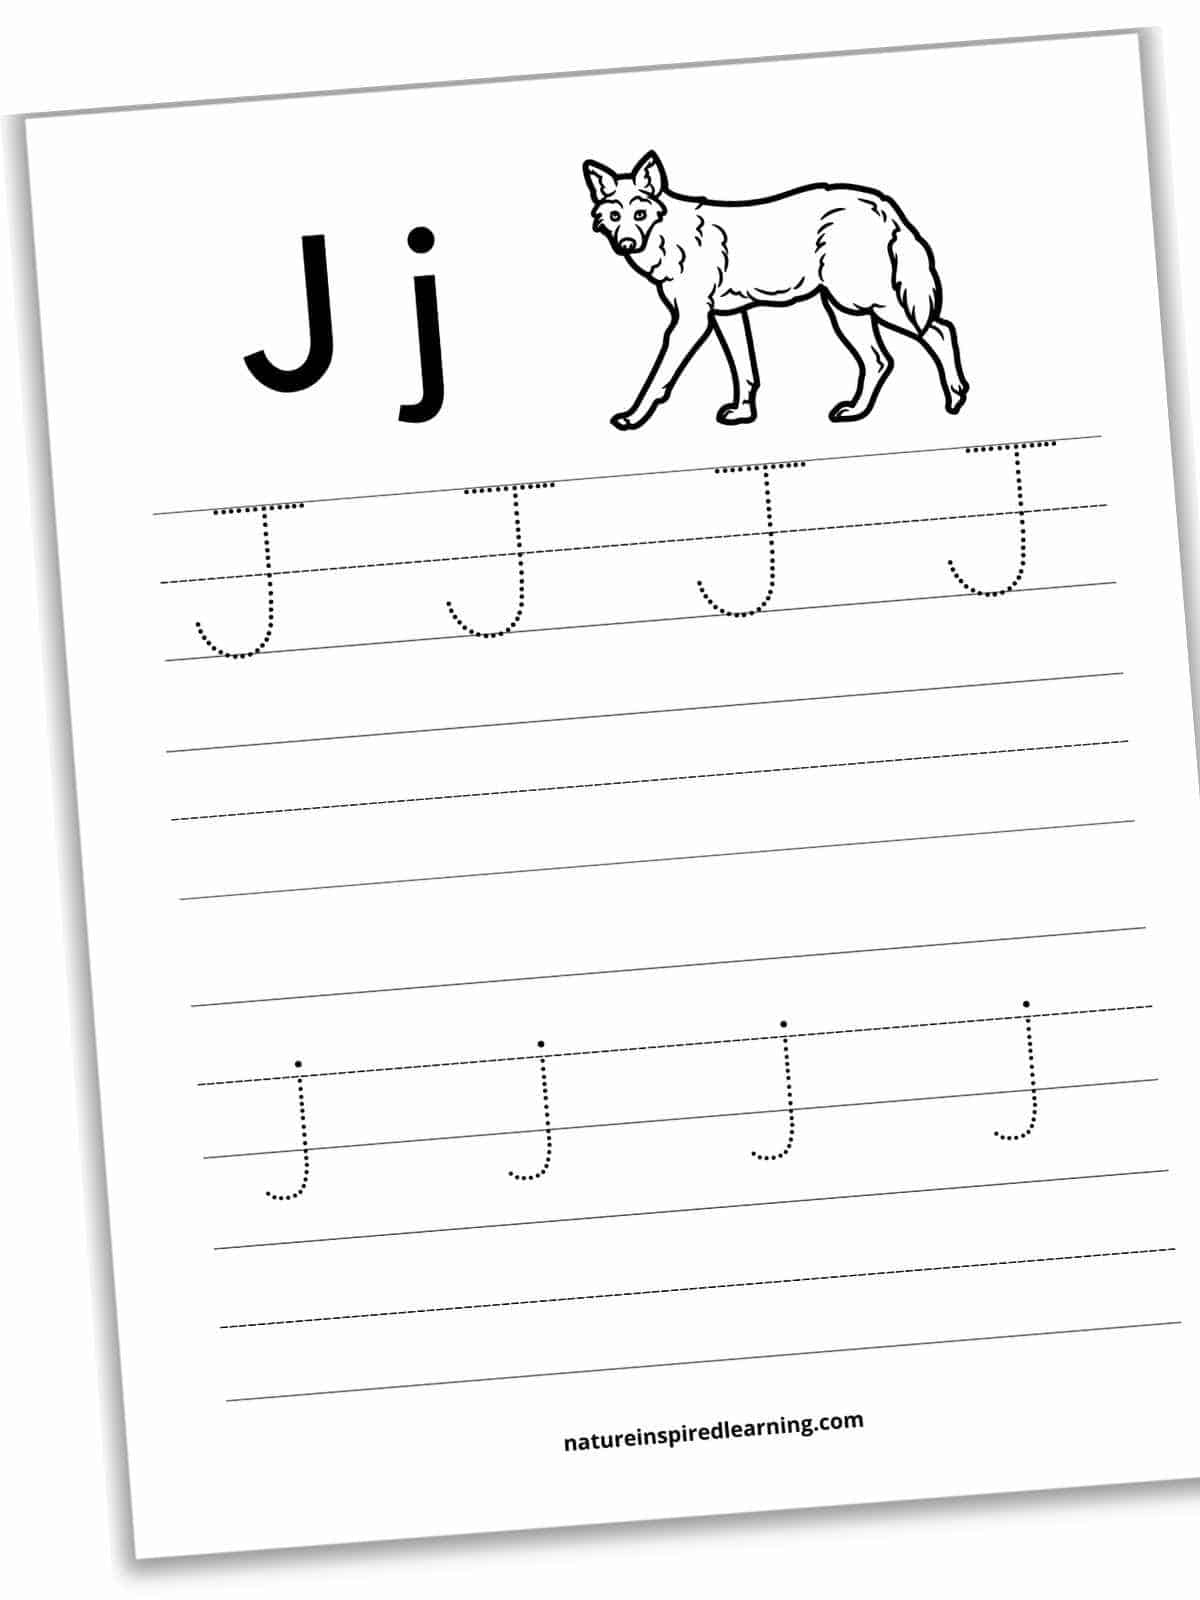 Worksheet with bold J and j next to a black and white jackal with four sets of lines below. J's in dotted font on the first set of lines with a blank set below. j's on the third set of lines with another blank set below.